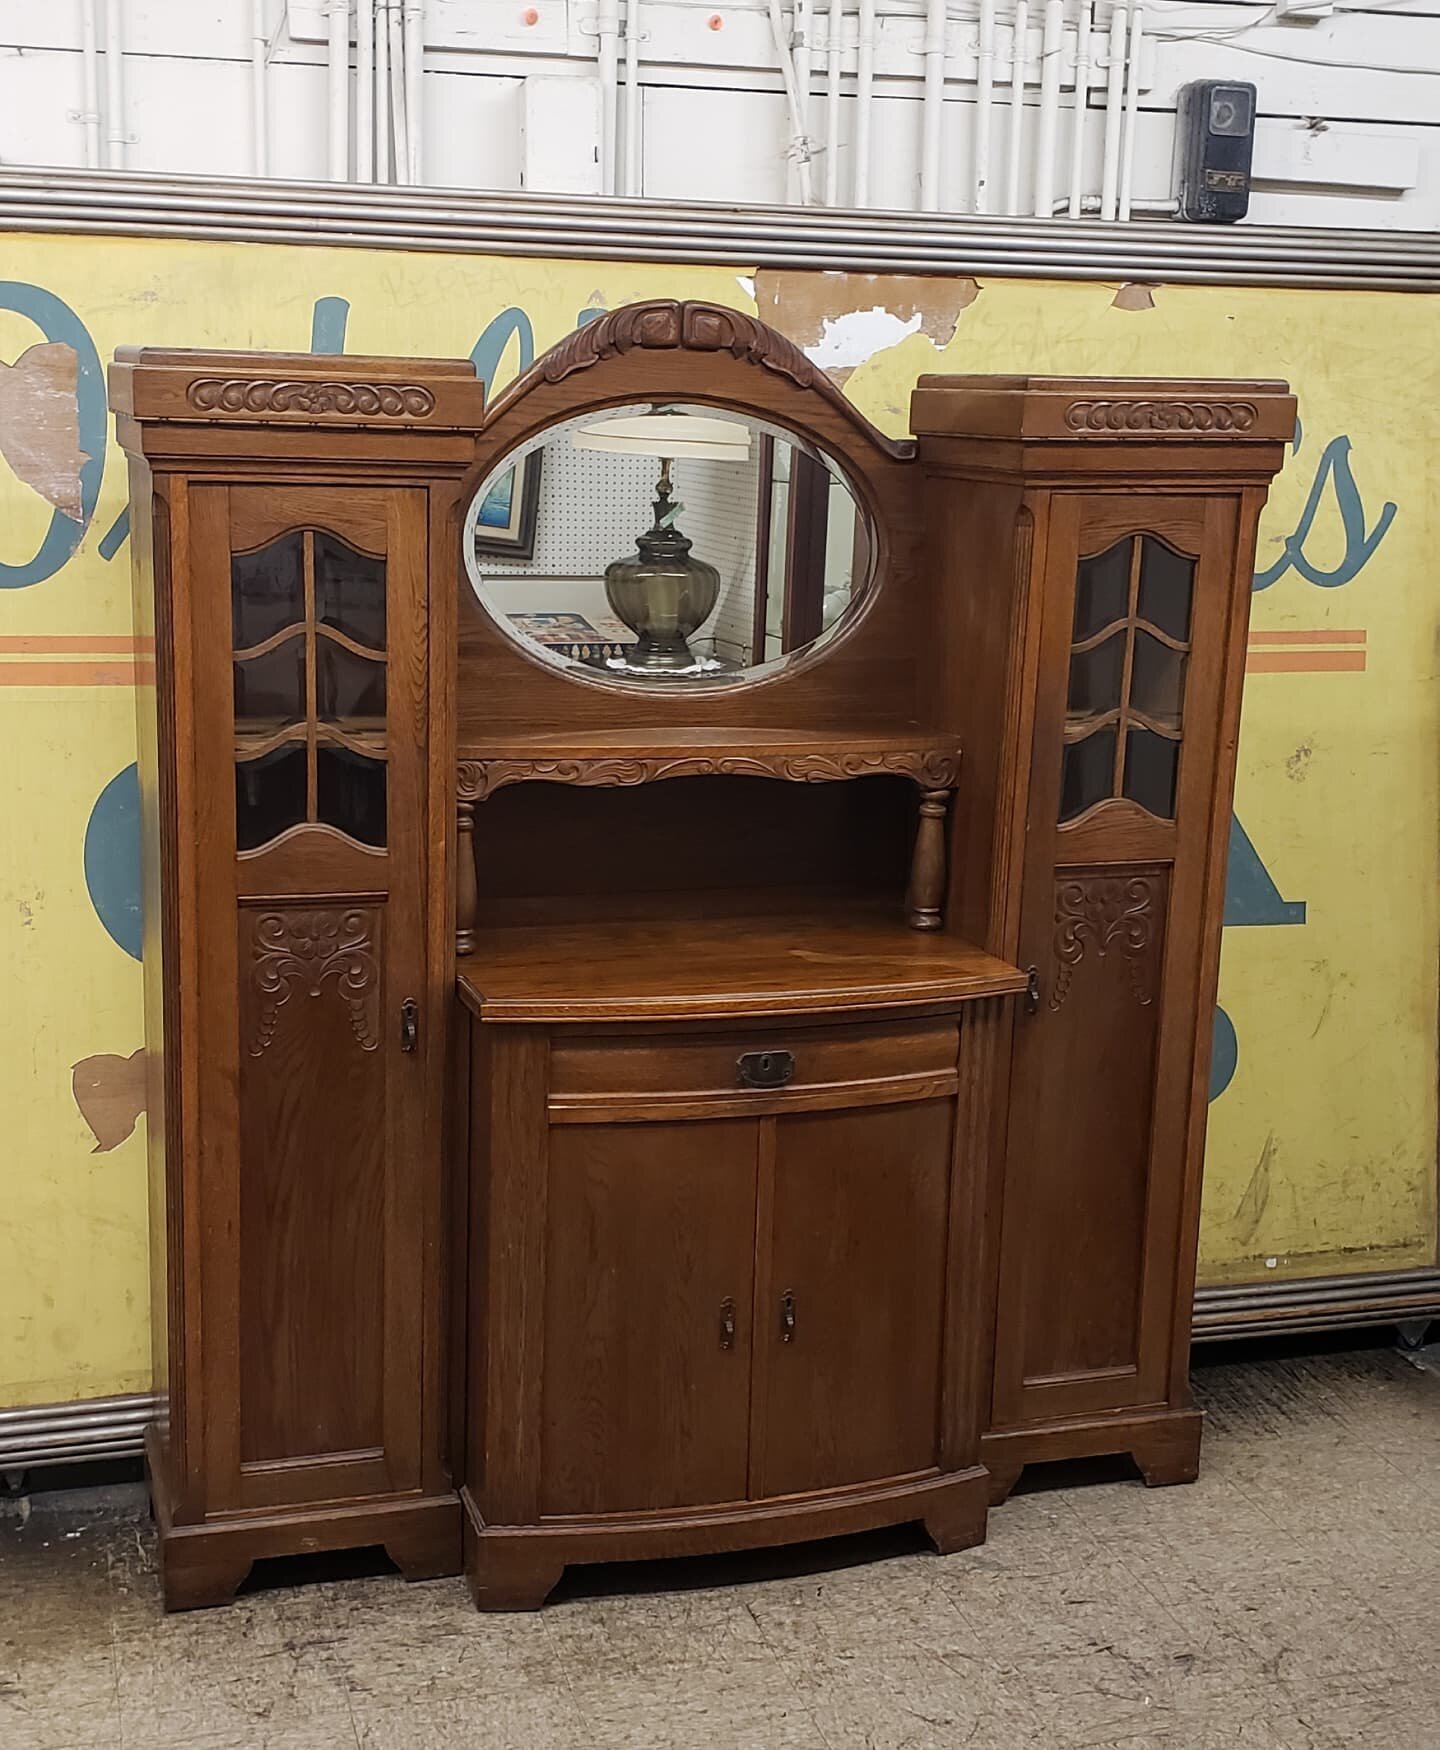 $300. Antique sideboard buffet China cabinet vanity hutch entryway piece. Comes apart in 3 pieces for easy transport ( just need a flathead screwdriver). 75&quot; tall 68&quot; wide 21&quot; deep. 
Plus tax.
This item is located in my Antique Mall bo